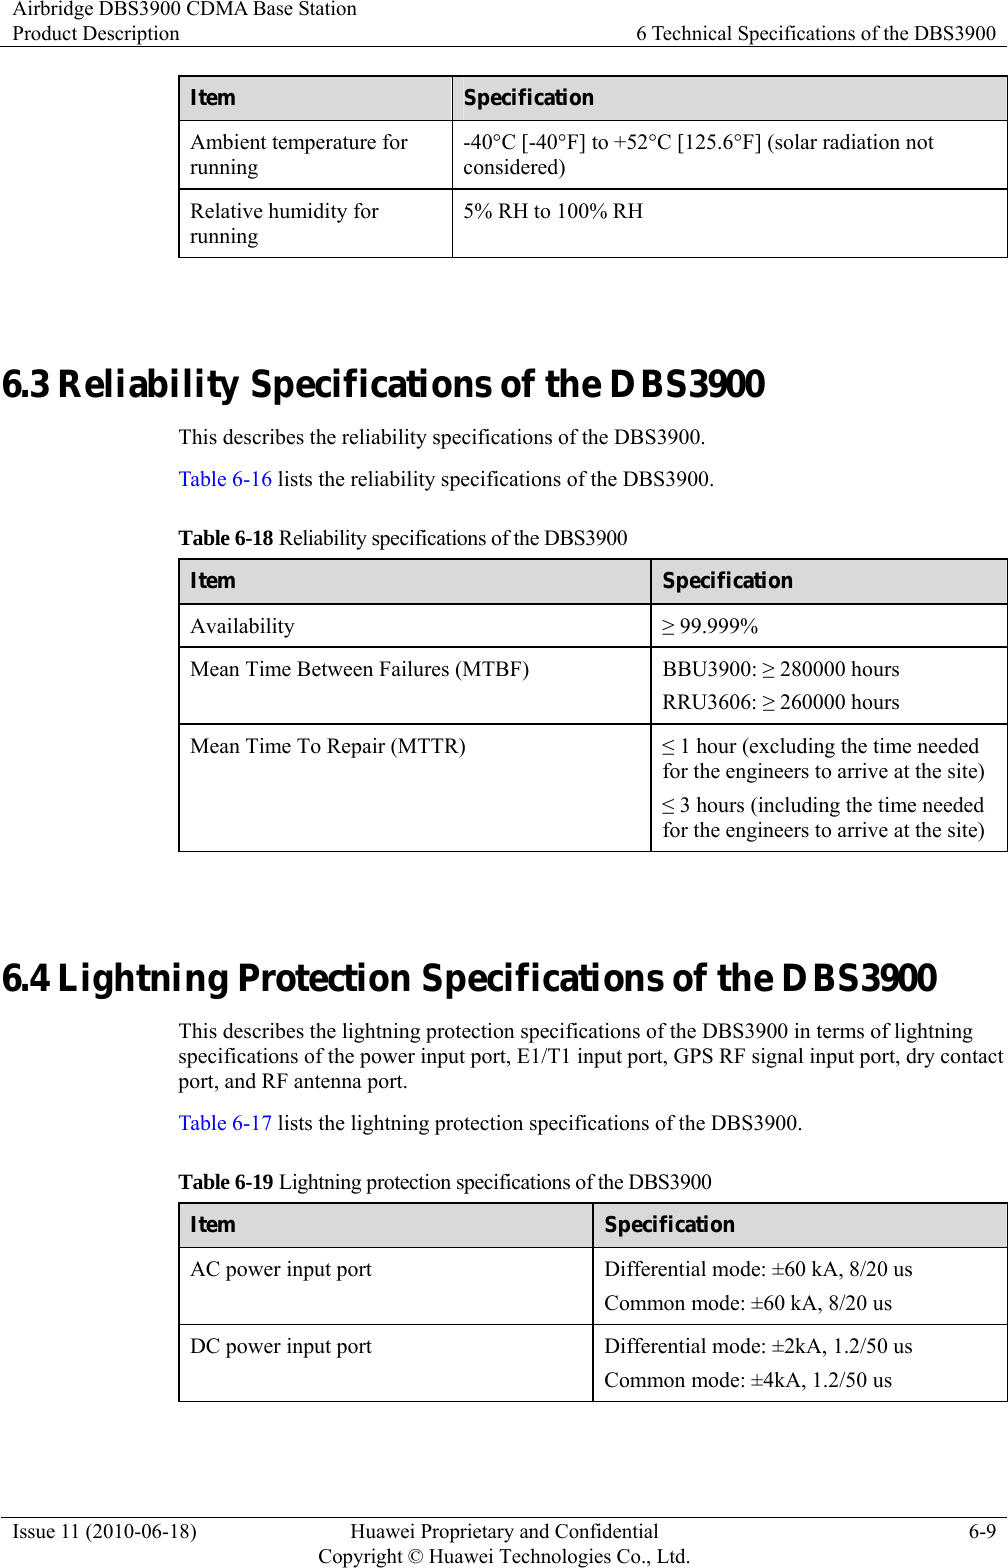 Airbridge DBS3900 CDMA Base Station Product Description  6 Technical Specifications of the DBS3900 Issue 11 (2010-06-18)  Huawei Proprietary and Confidential         Copyright © Huawei Technologies Co., Ltd.6-9 Item  Specification Ambient temperature for running -40°C [-40°F] to +52°C [125.6°F] (solar radiation not considered) Relative humidity for running 5% RH to 100% RH  6.3 Reliability Specifications of the DBS3900 This describes the reliability specifications of the DBS3900. Table 6-16 lists the reliability specifications of the DBS3900. Table 6-18 Reliability specifications of the DBS3900 Item  Specification Availability  ≥ 99.999% Mean Time Between Failures (MTBF)    BBU3900: ≥ 280000 hours RRU3606: ≥ 260000 hours Mean Time To Repair (MTTR)    ≤ 1 hour (excluding the time needed for the engineers to arrive at the site) ≤ 3 hours (including the time needed for the engineers to arrive at the site)  6.4 Lightning Protection Specifications of the DBS3900 This describes the lightning protection specifications of the DBS3900 in terms of lightning specifications of the power input port, E1/T1 input port, GPS RF signal input port, dry contact port, and RF antenna port. Table 6-17 lists the lightning protection specifications of the DBS3900. Table 6-19 Lightning protection specifications of the DBS3900 Item  Specification AC power input port  Differential mode: ±60 kA, 8/20 us Common mode: ±60 kA, 8/20 us DC power input port  Differential mode: ±2kA, 1.2/50 us Common mode: ±4kA, 1.2/50 us 